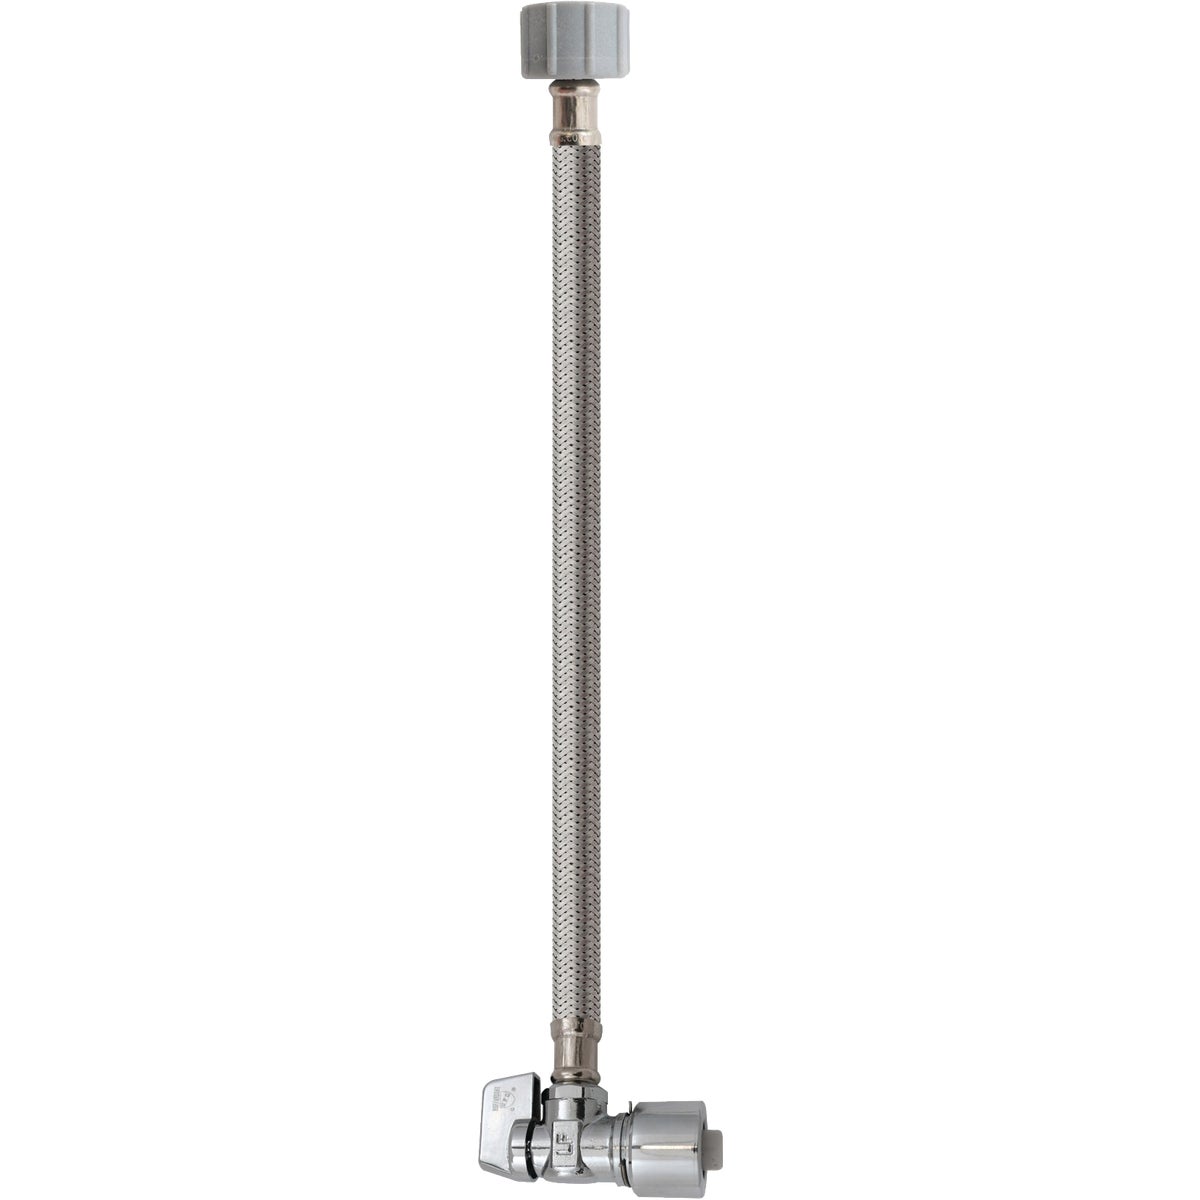 Keeney 5/8 In. x 20 In. Stainless Steel Quick Lock Toilet Supply Tube with Angled Quarter Turn Valve